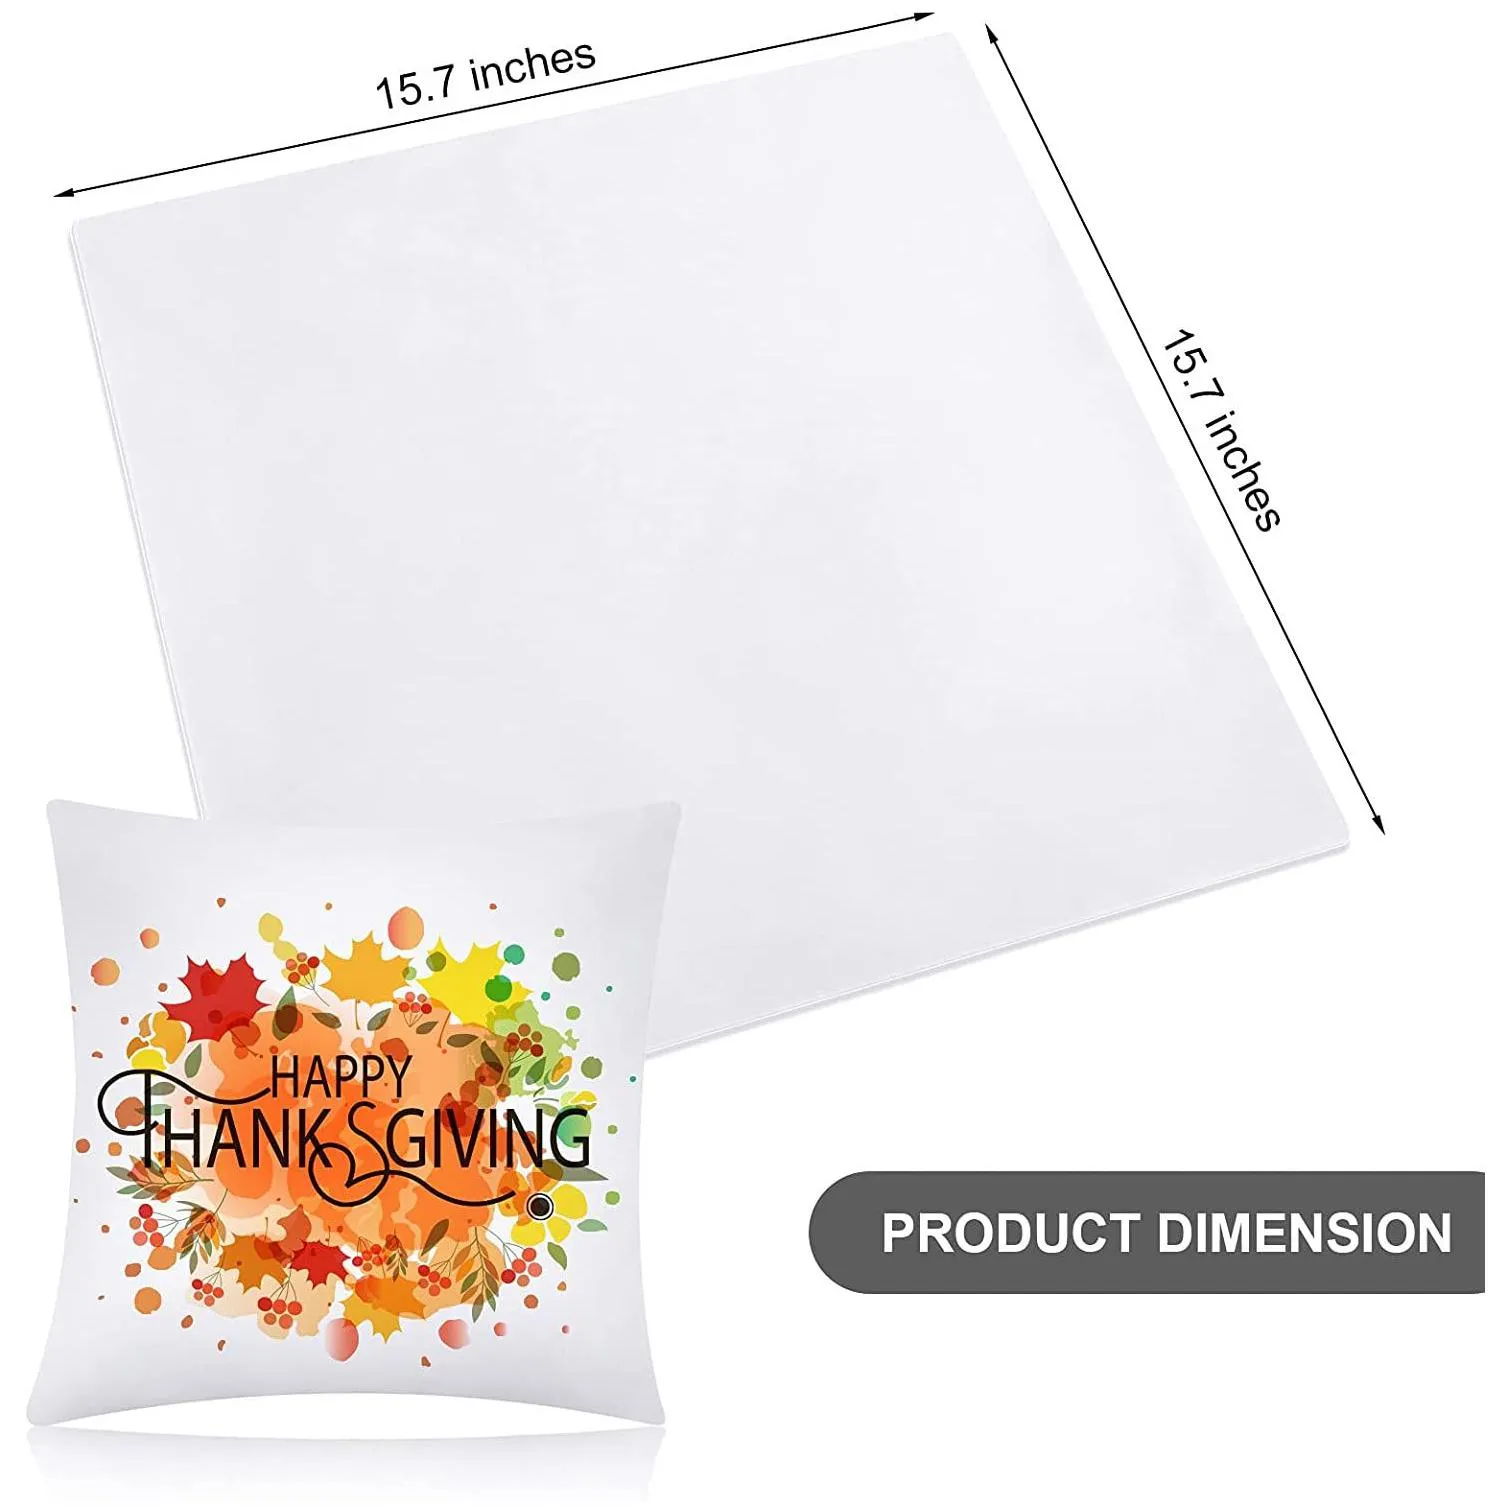 Pillow Case Sublimation Pillow Case White Cushion Ers Blanks Heat Transfer Polyester Peach Skin Throw 15.7 X Inches Drop Delivery Home Dh269